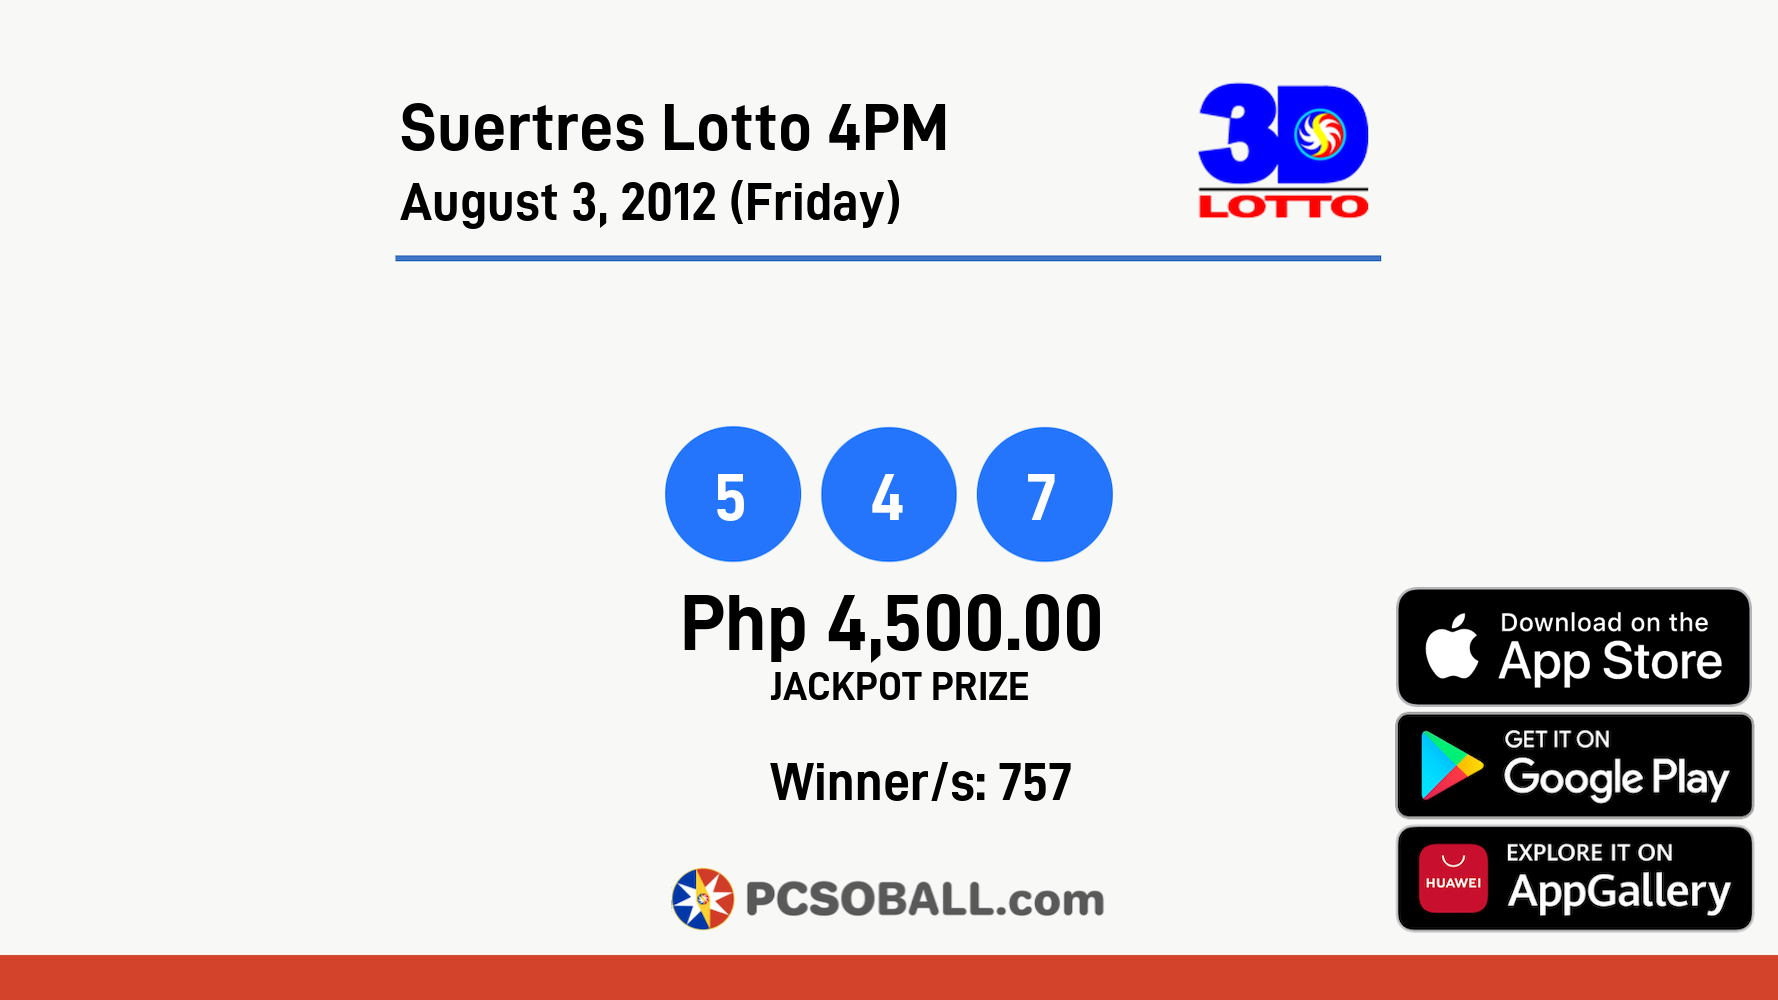 Suertres Lotto 4PM August 3, 2012 (Friday) Result